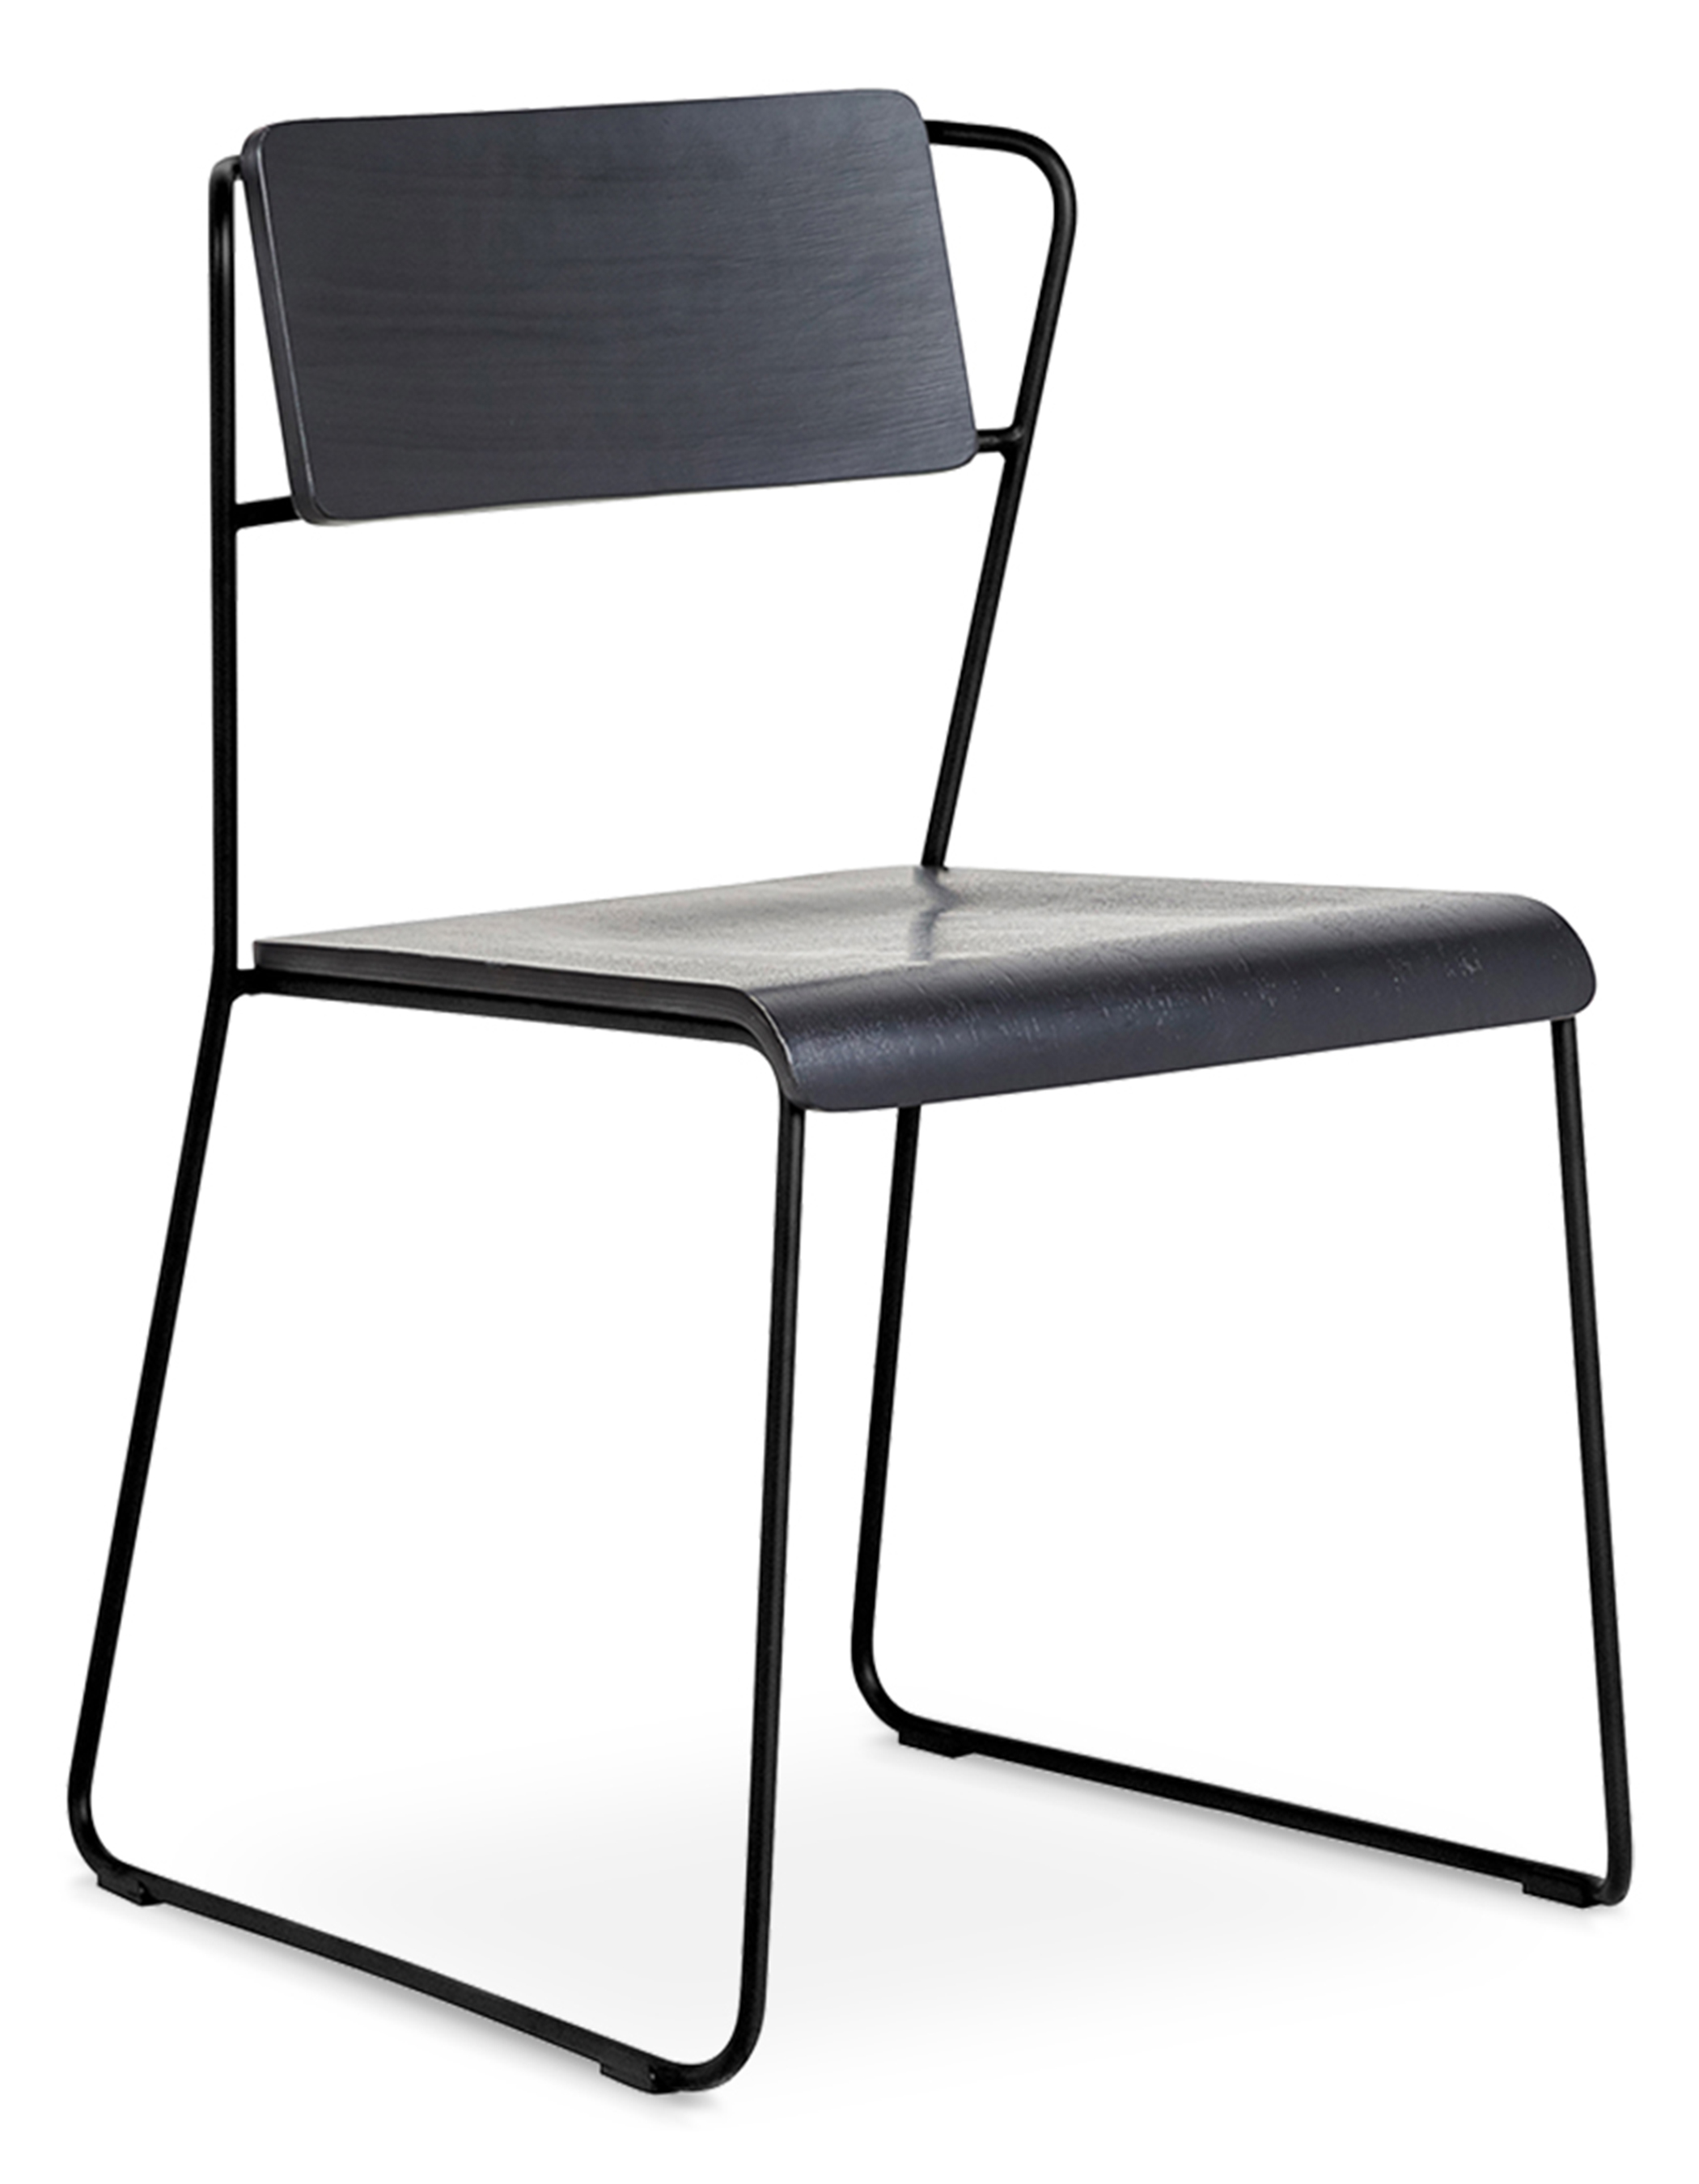 WS - Transit chair - Black ash (Front angle)